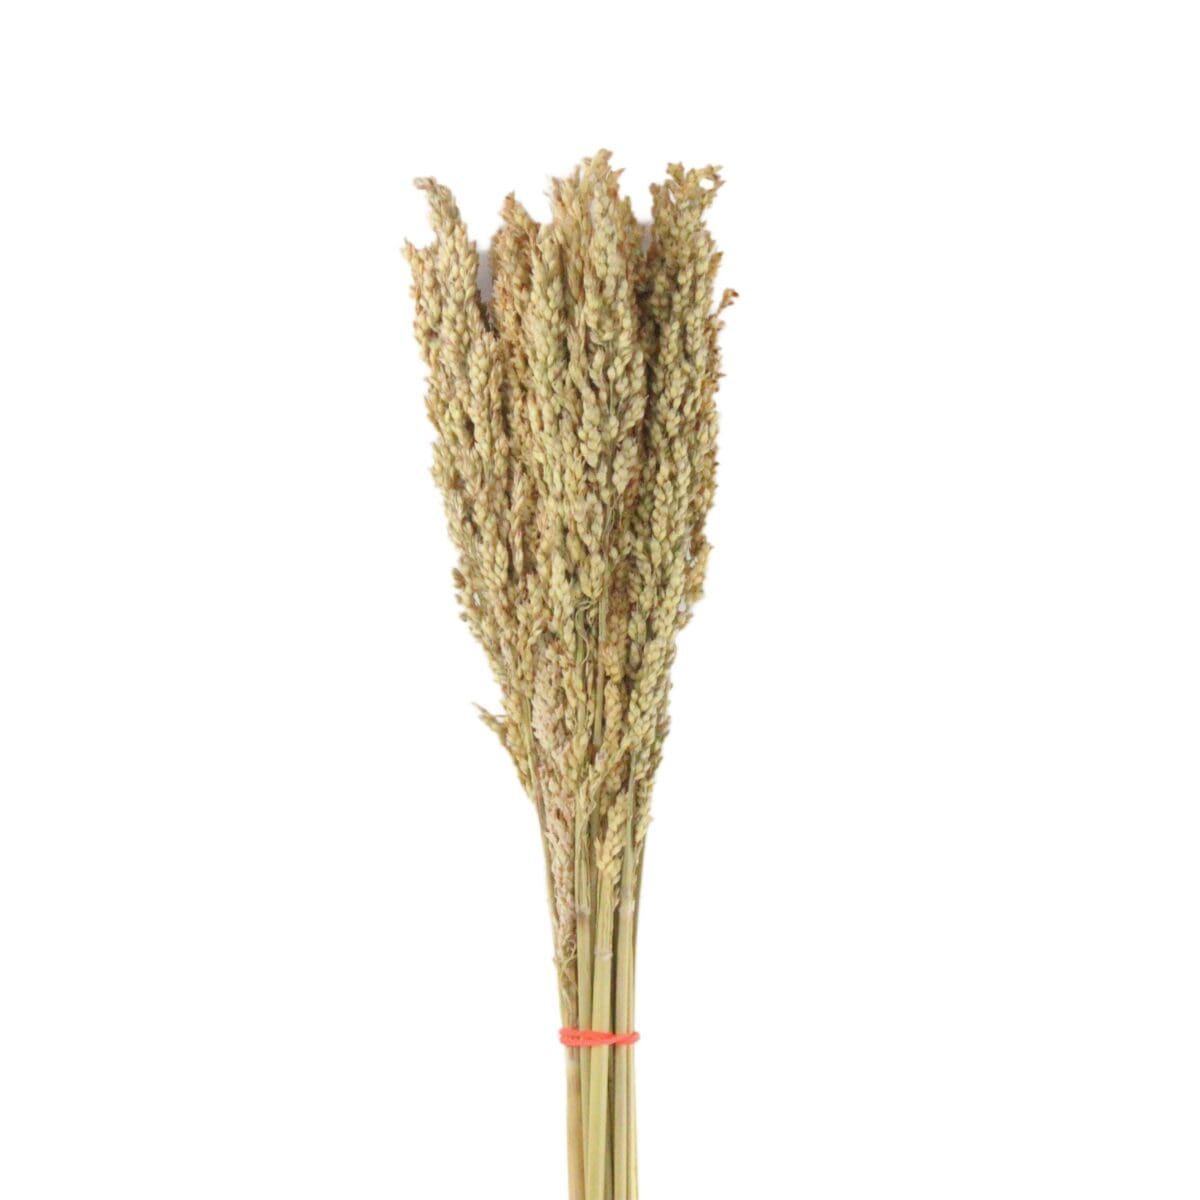 Sorghum Dried Grass Great Millet